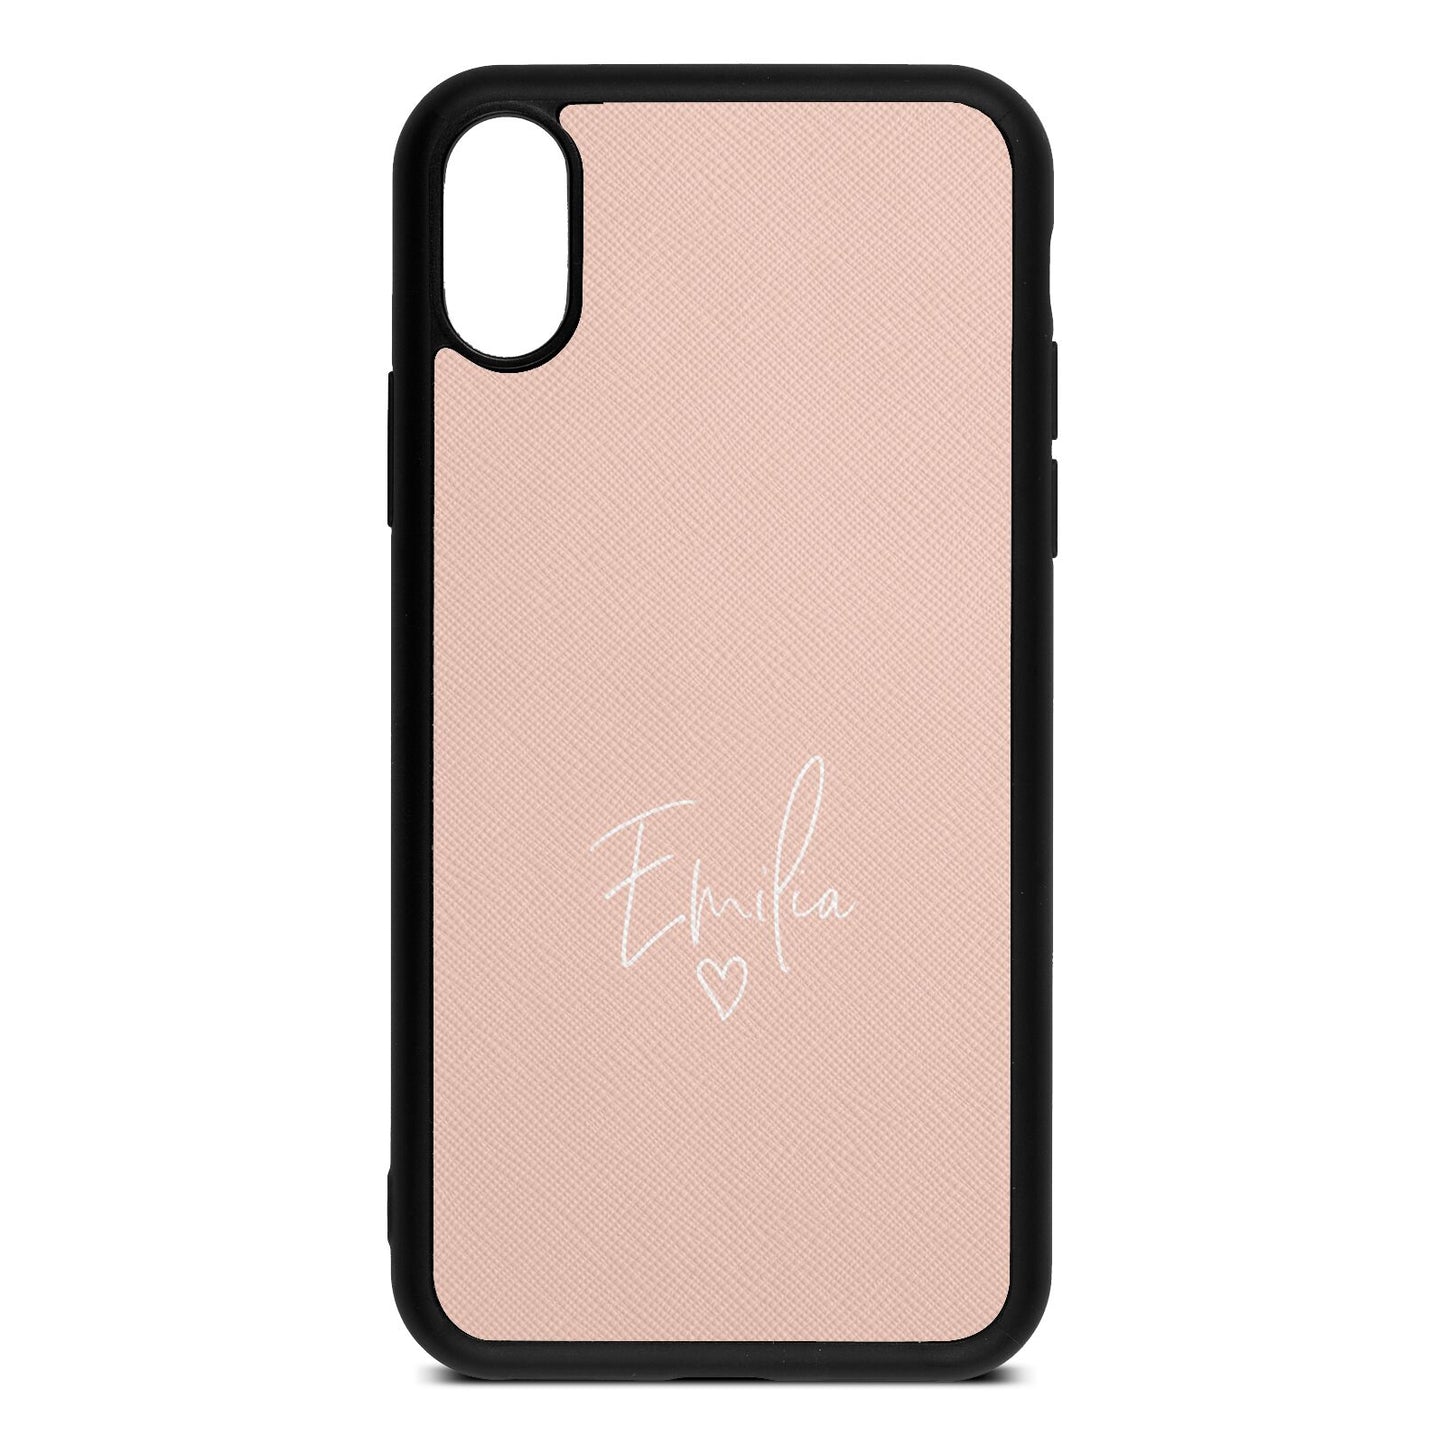 White Handwritten Name Transparent Nude Saffiano Leather iPhone Xs Case